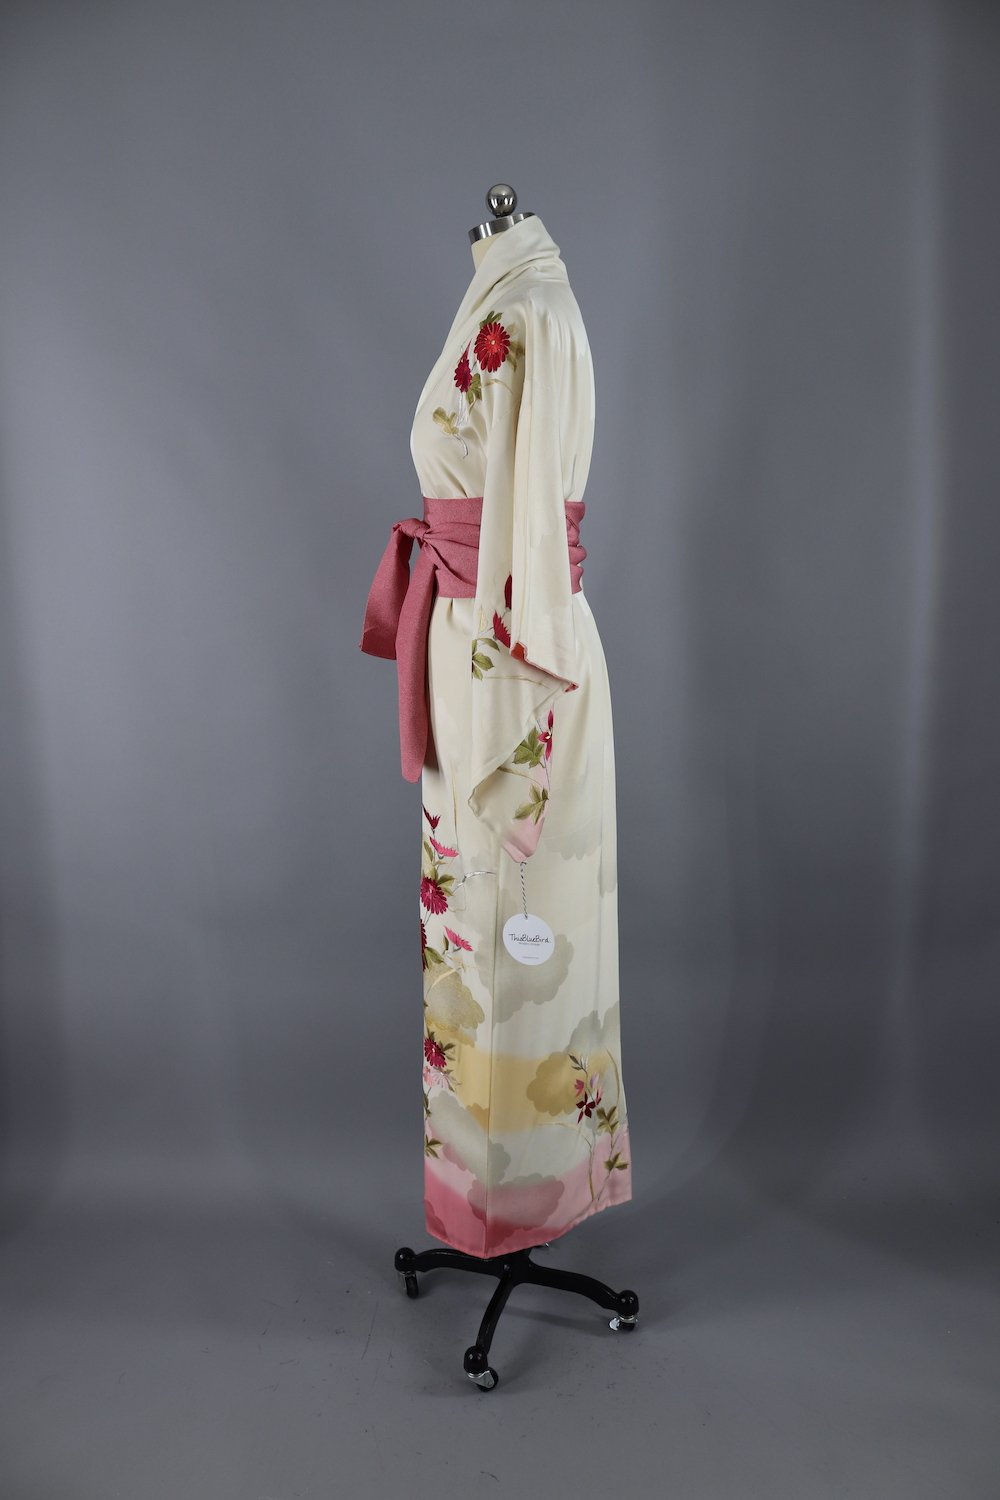 Vintage Silk Kimono Robe / Ivory and Bright Pink Embroidered Floral-ThisBlueBird - Modern Vintage